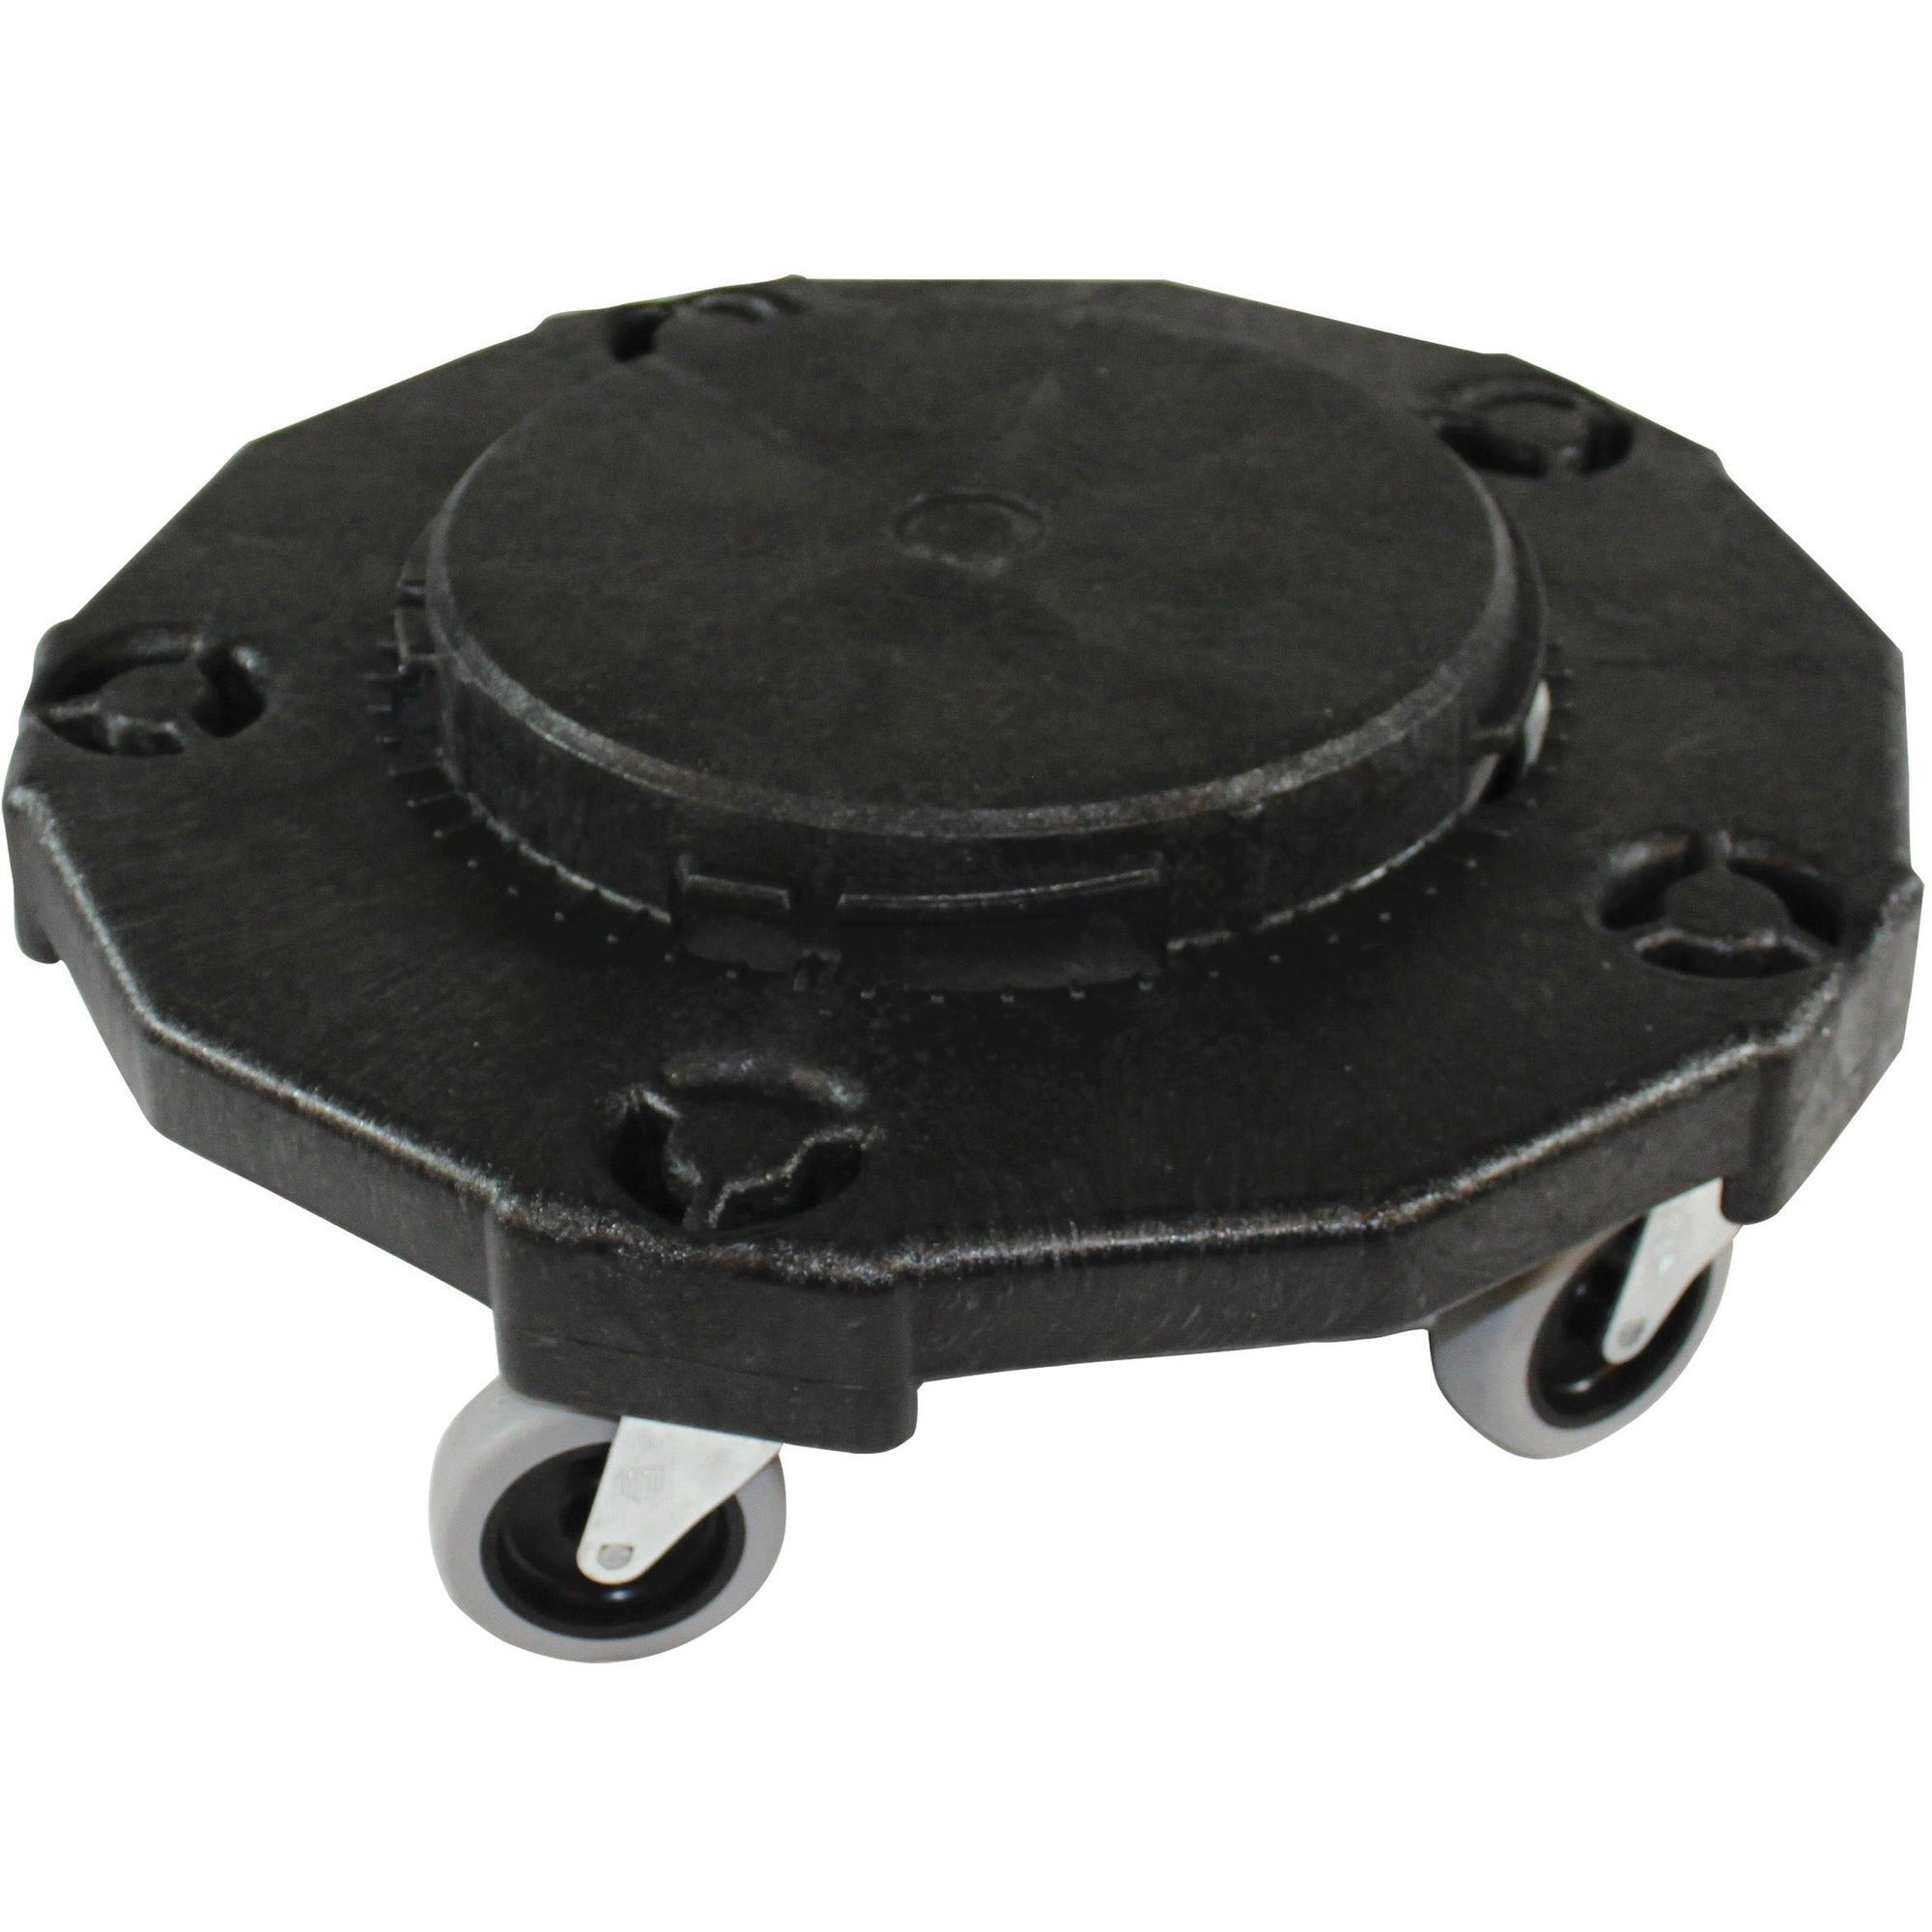 Genuine Joe Round Dolly - 5 Casters - 3" Caster Size - Resin - Black - 1 Each - 